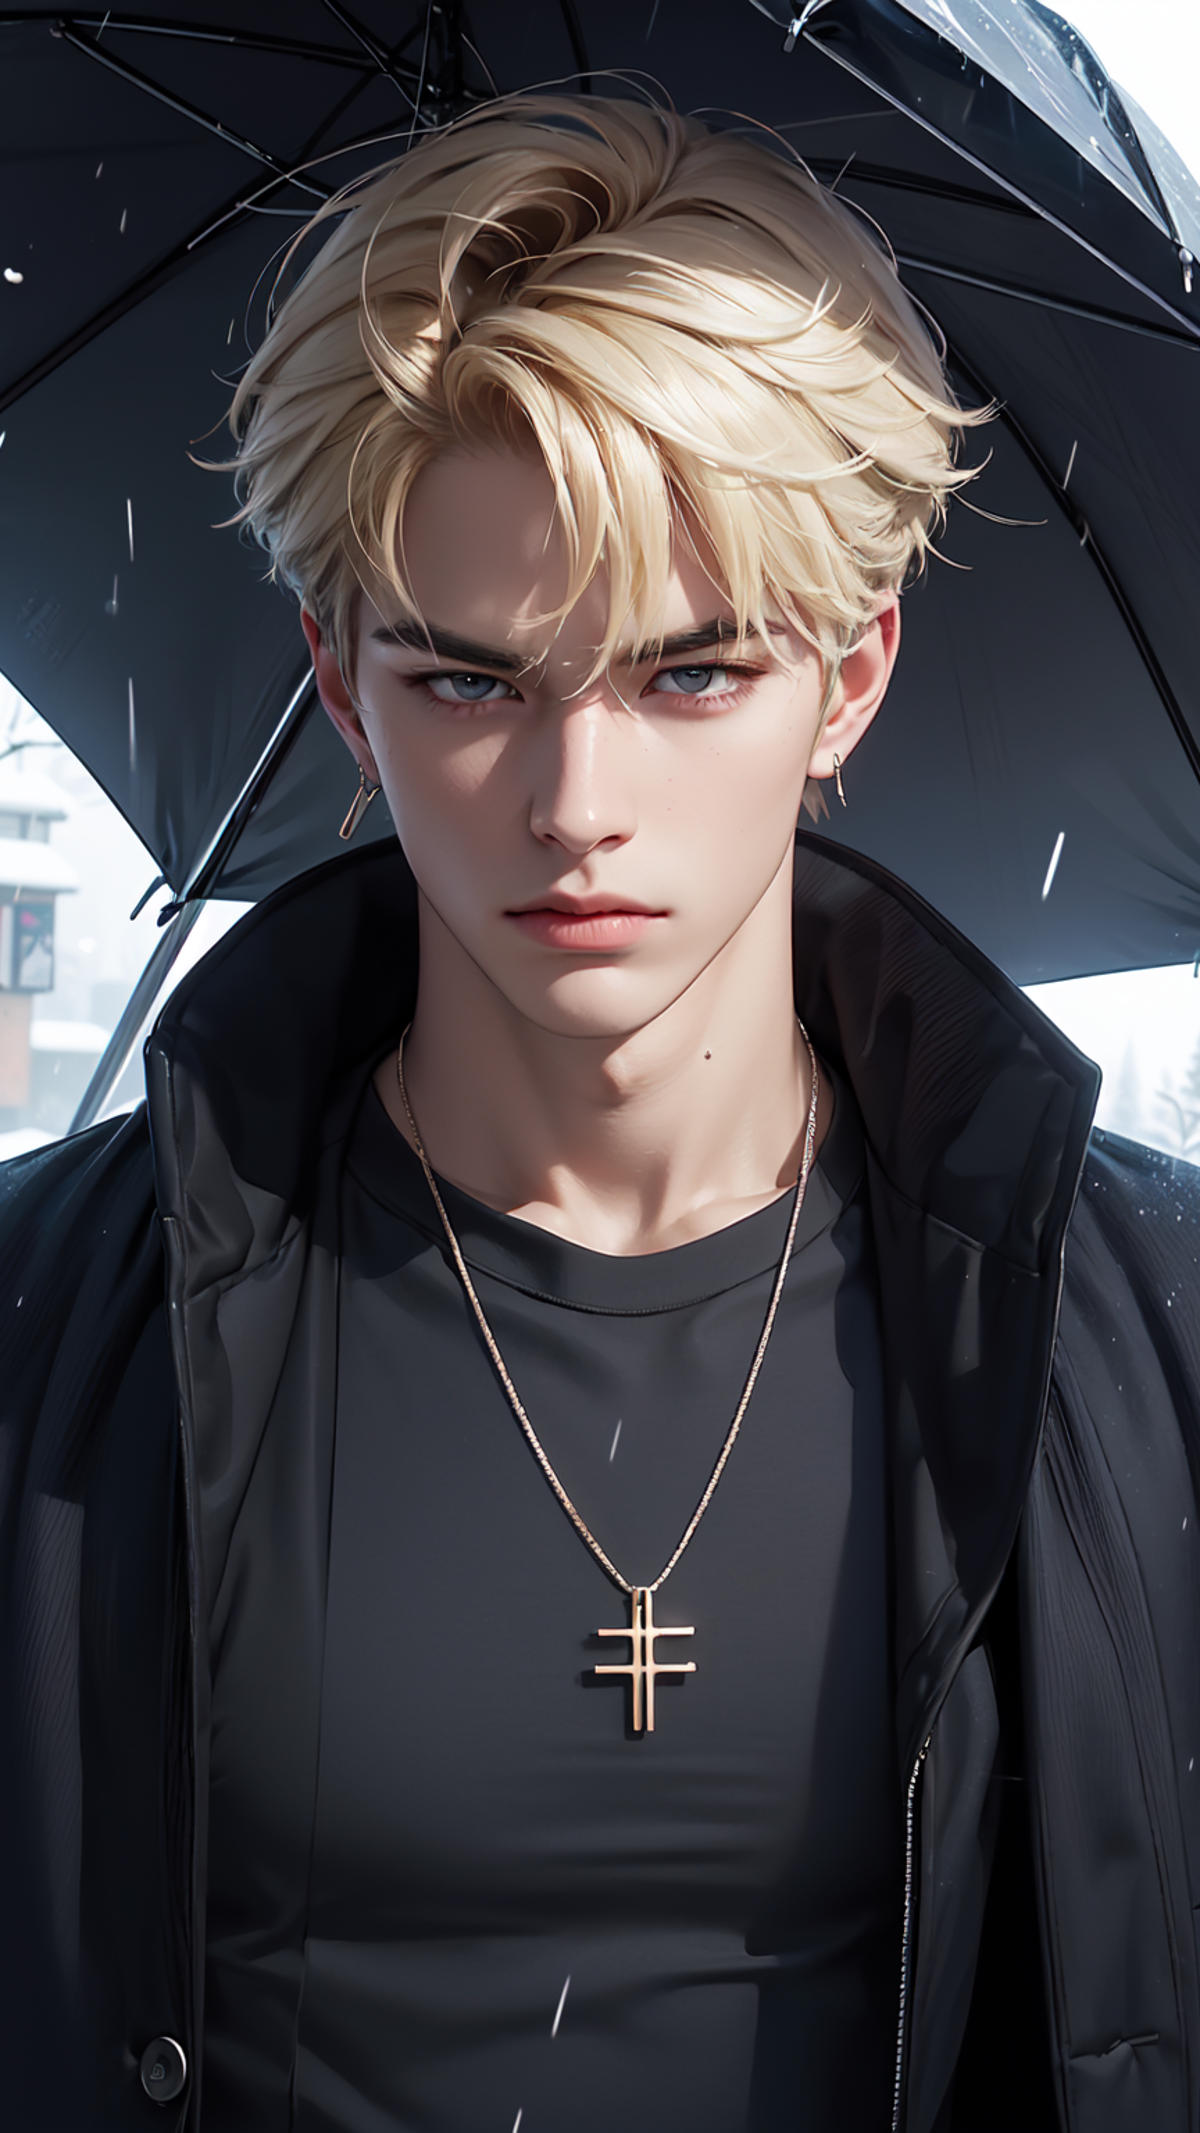 A young man wearing a black shirt and necklace holds an umbrella.